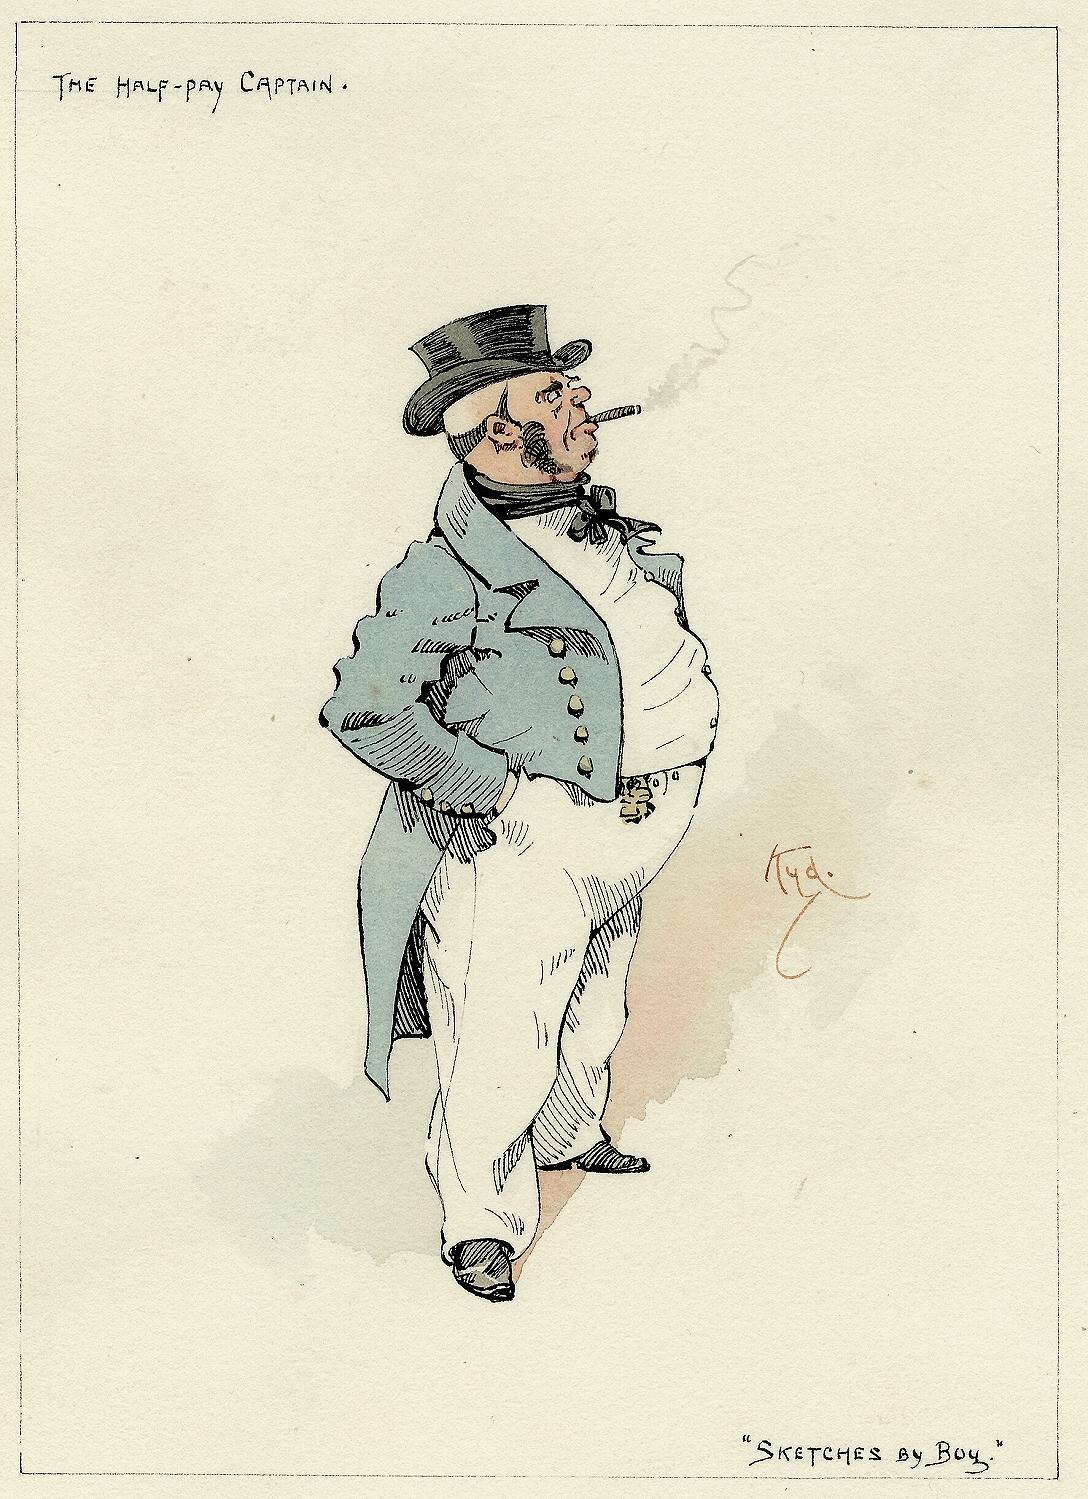 AUTHOR: CLARKE, Joseph Clayton (KYD) (Charles Dickens). 

TITLE: The Half-Pay Captain (from Sketches By Boz).

PUBLISHER: England, [c. 1920]

DESCRIPTION: ORIGINAL INK AND WATERCOLOR SKETCH. 1 leaf, on paper, image 5-15/16